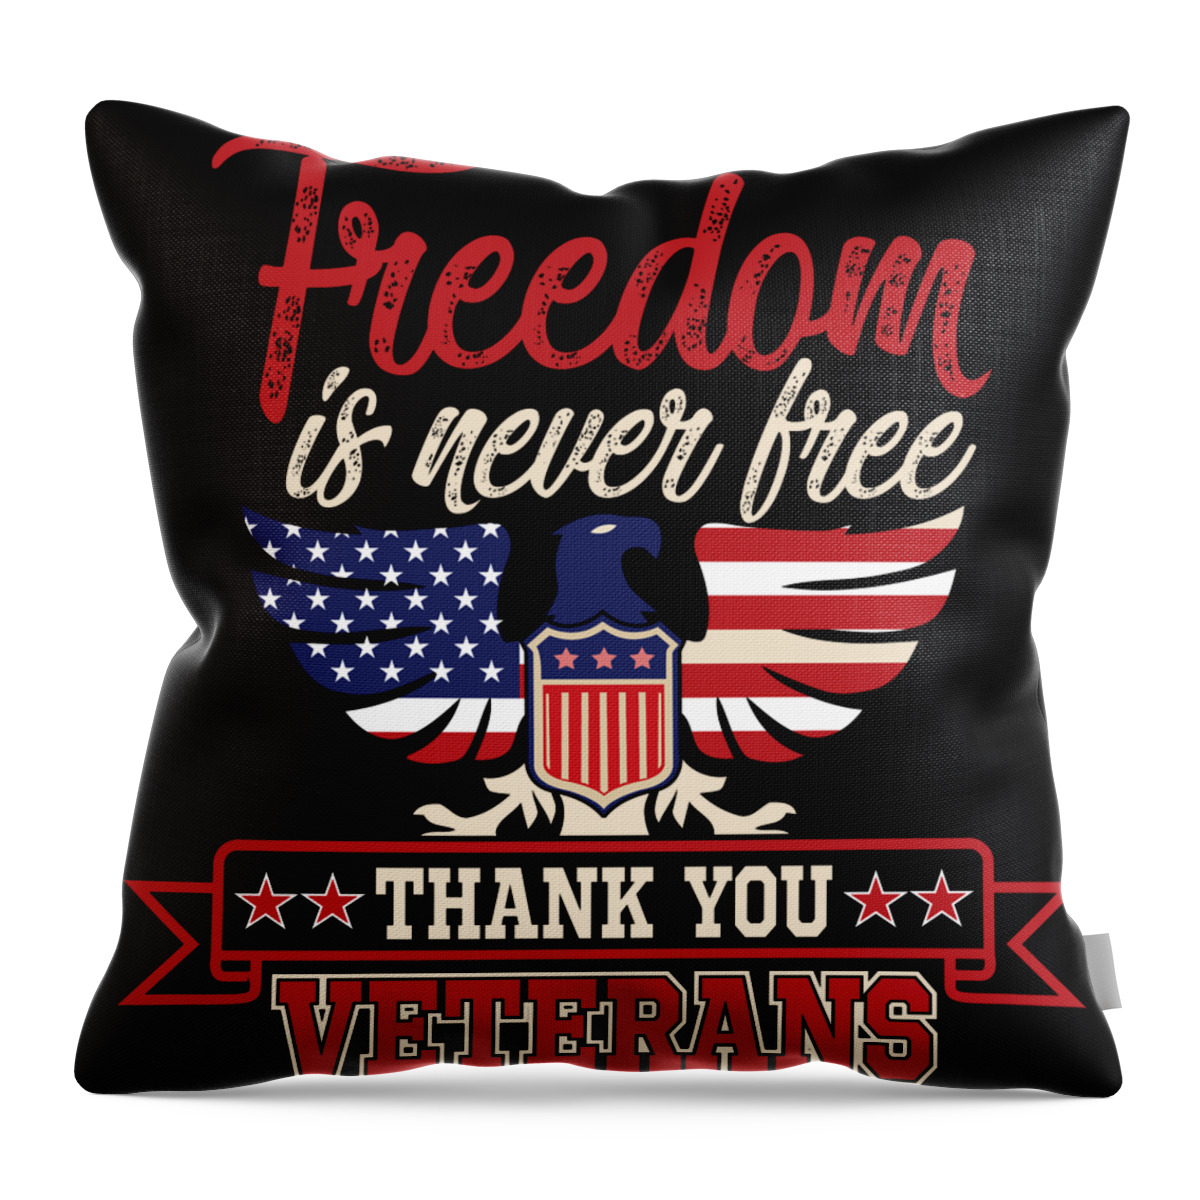 Thank You Throw Pillow featuring the digital art Freedom Is Never Free Thank You Veterans by Jacob Zelazny